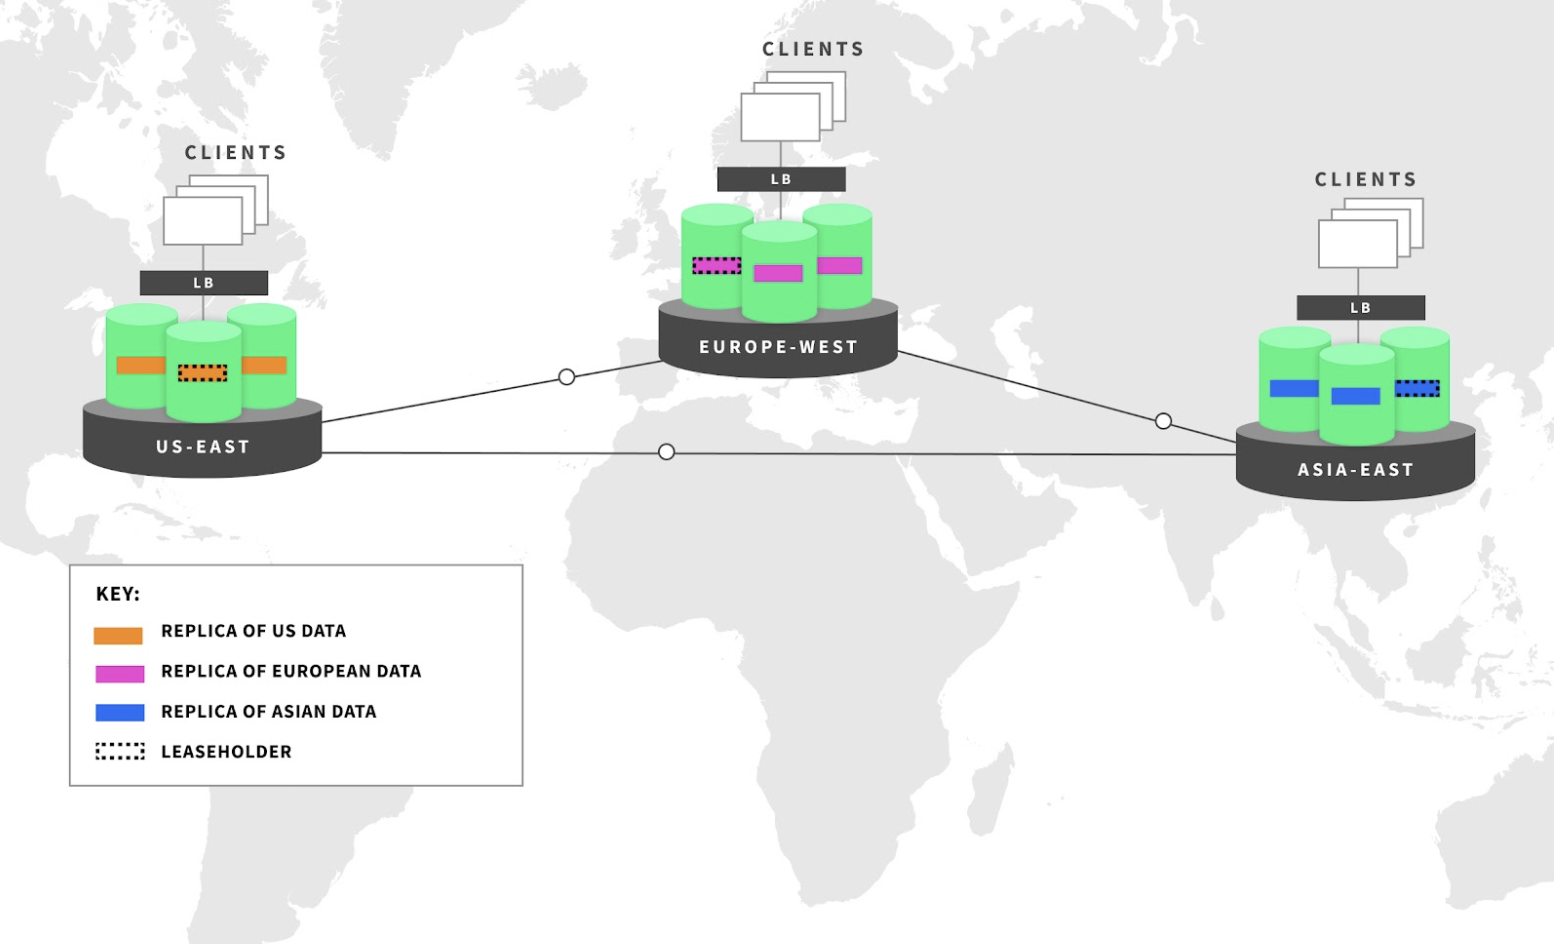 The manufacturer's Managed CockroachDB cluster uses the geo-partitioned replicas configuration, where all replicas for a set of data are constrained to a region, and each replica is pinned to a separate datacenter.